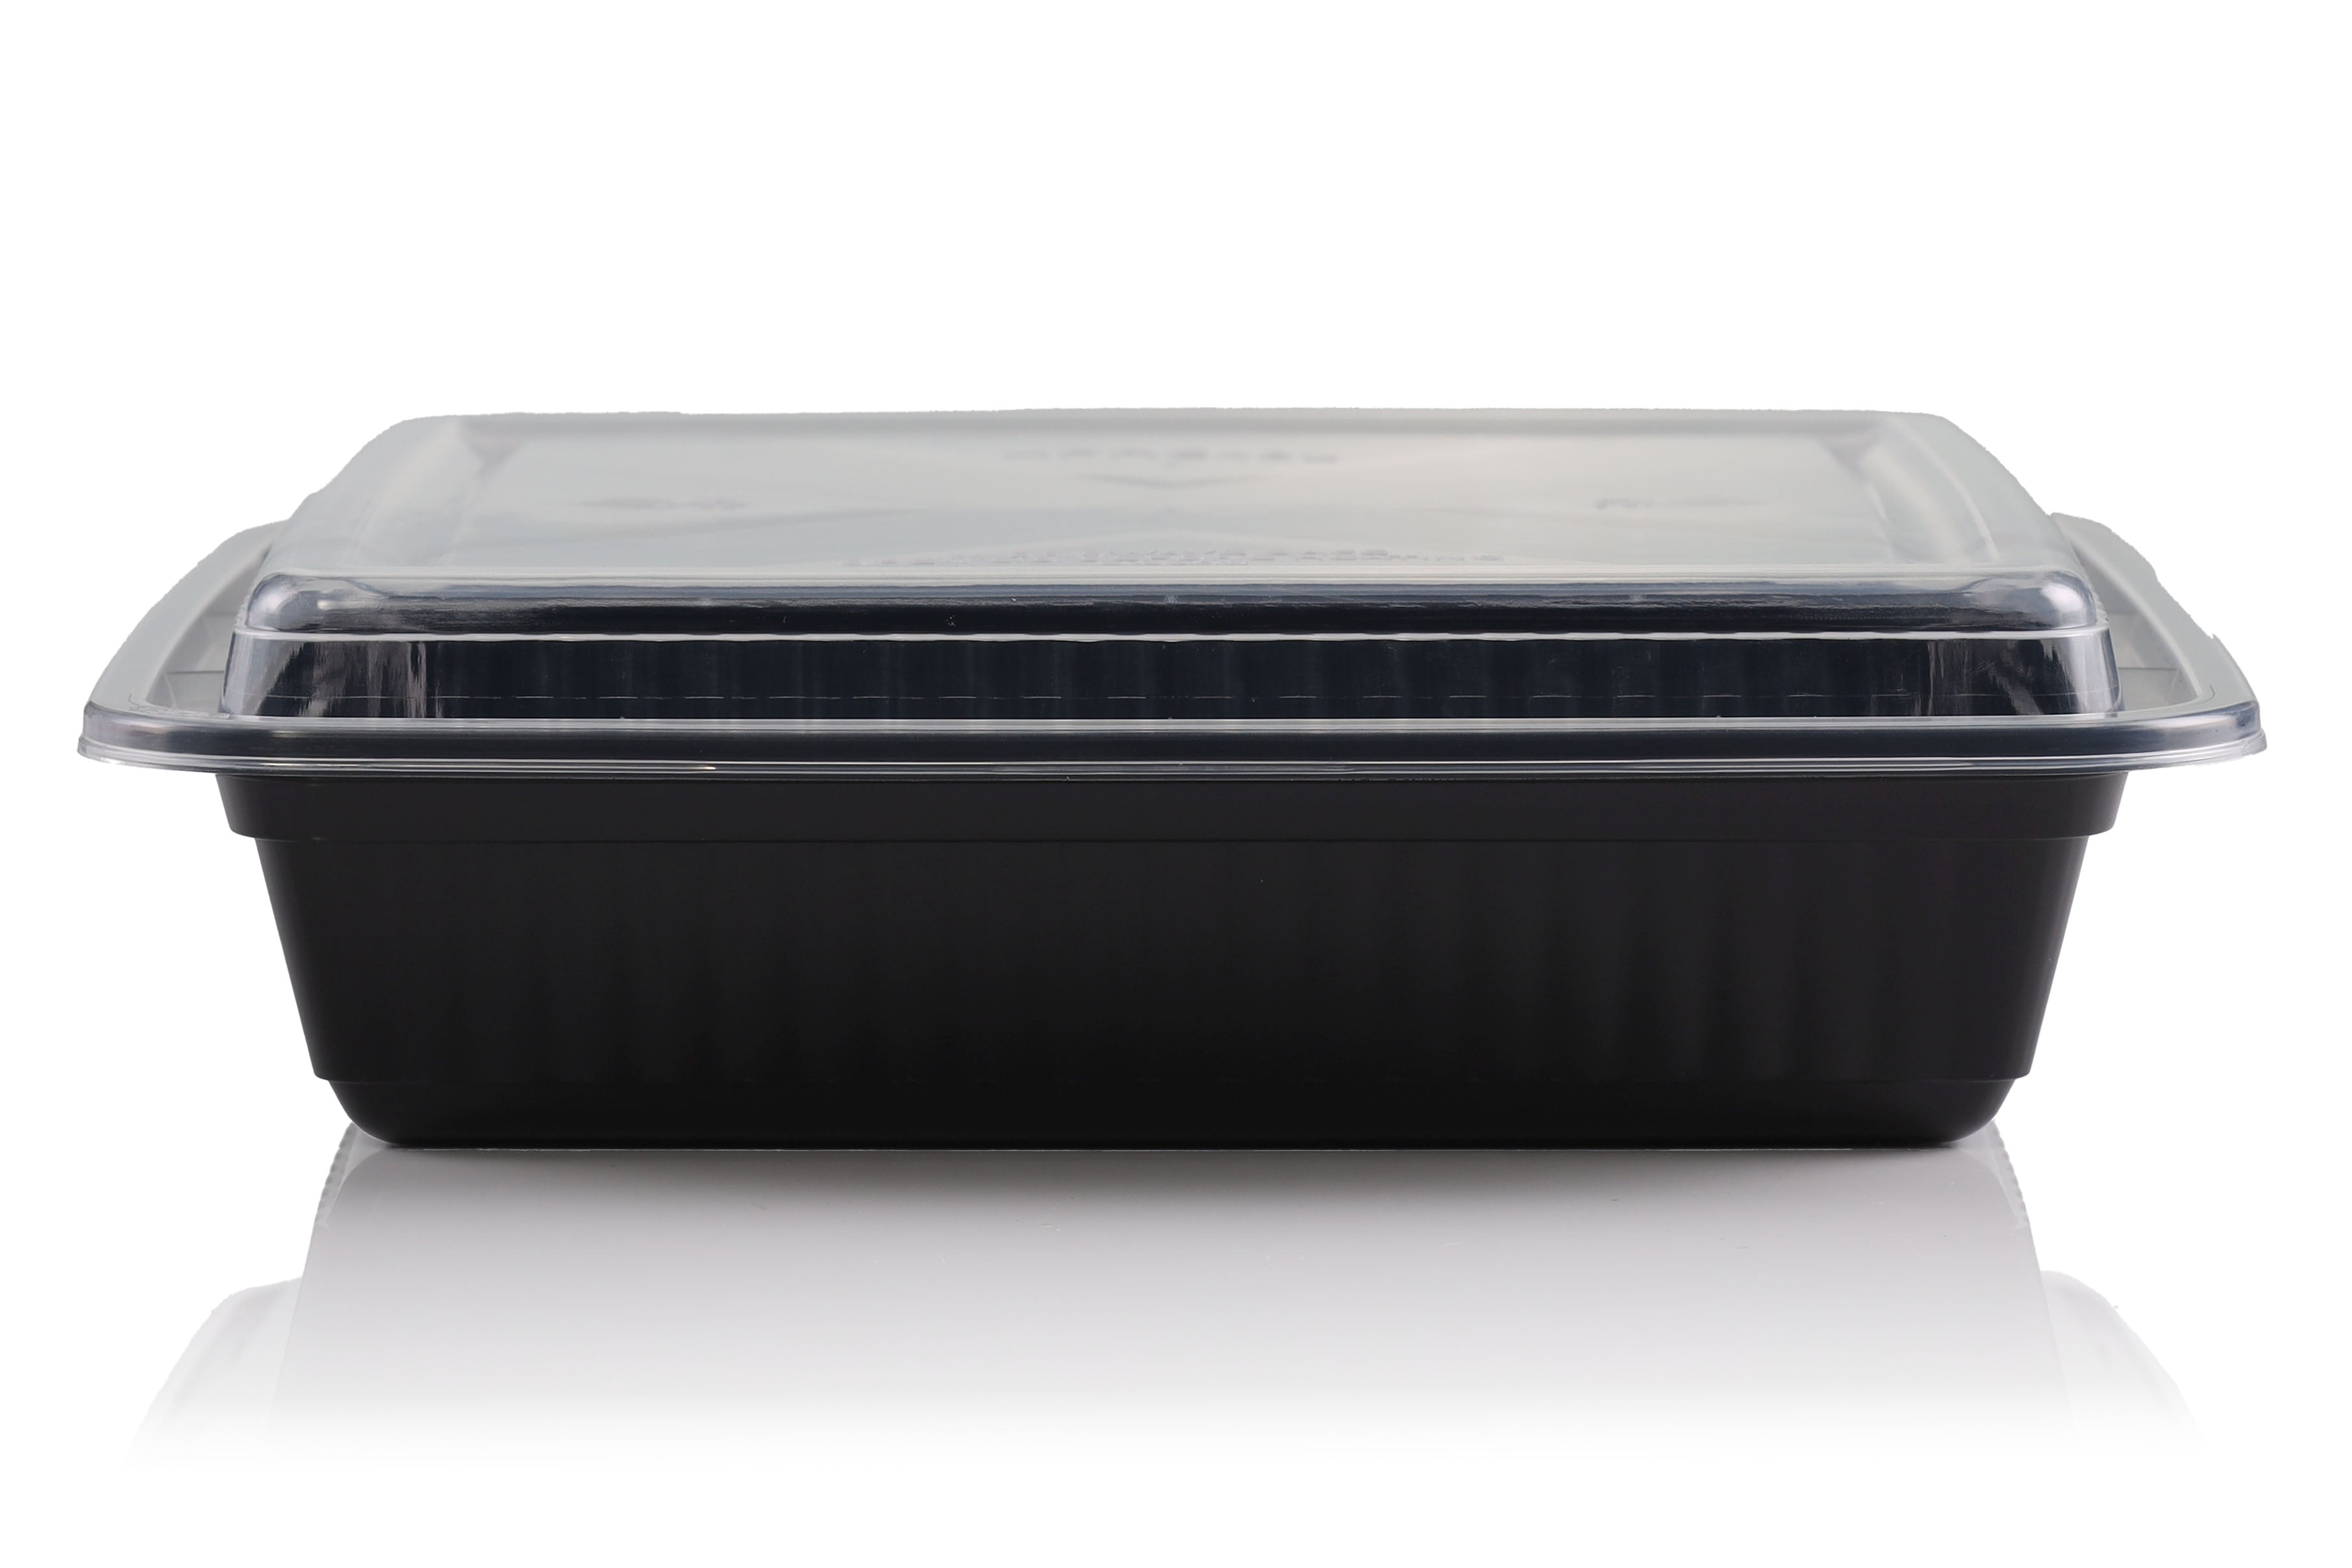 16oz Black Rectangular Mealprep Containers with Clear Lids 5 Pieces